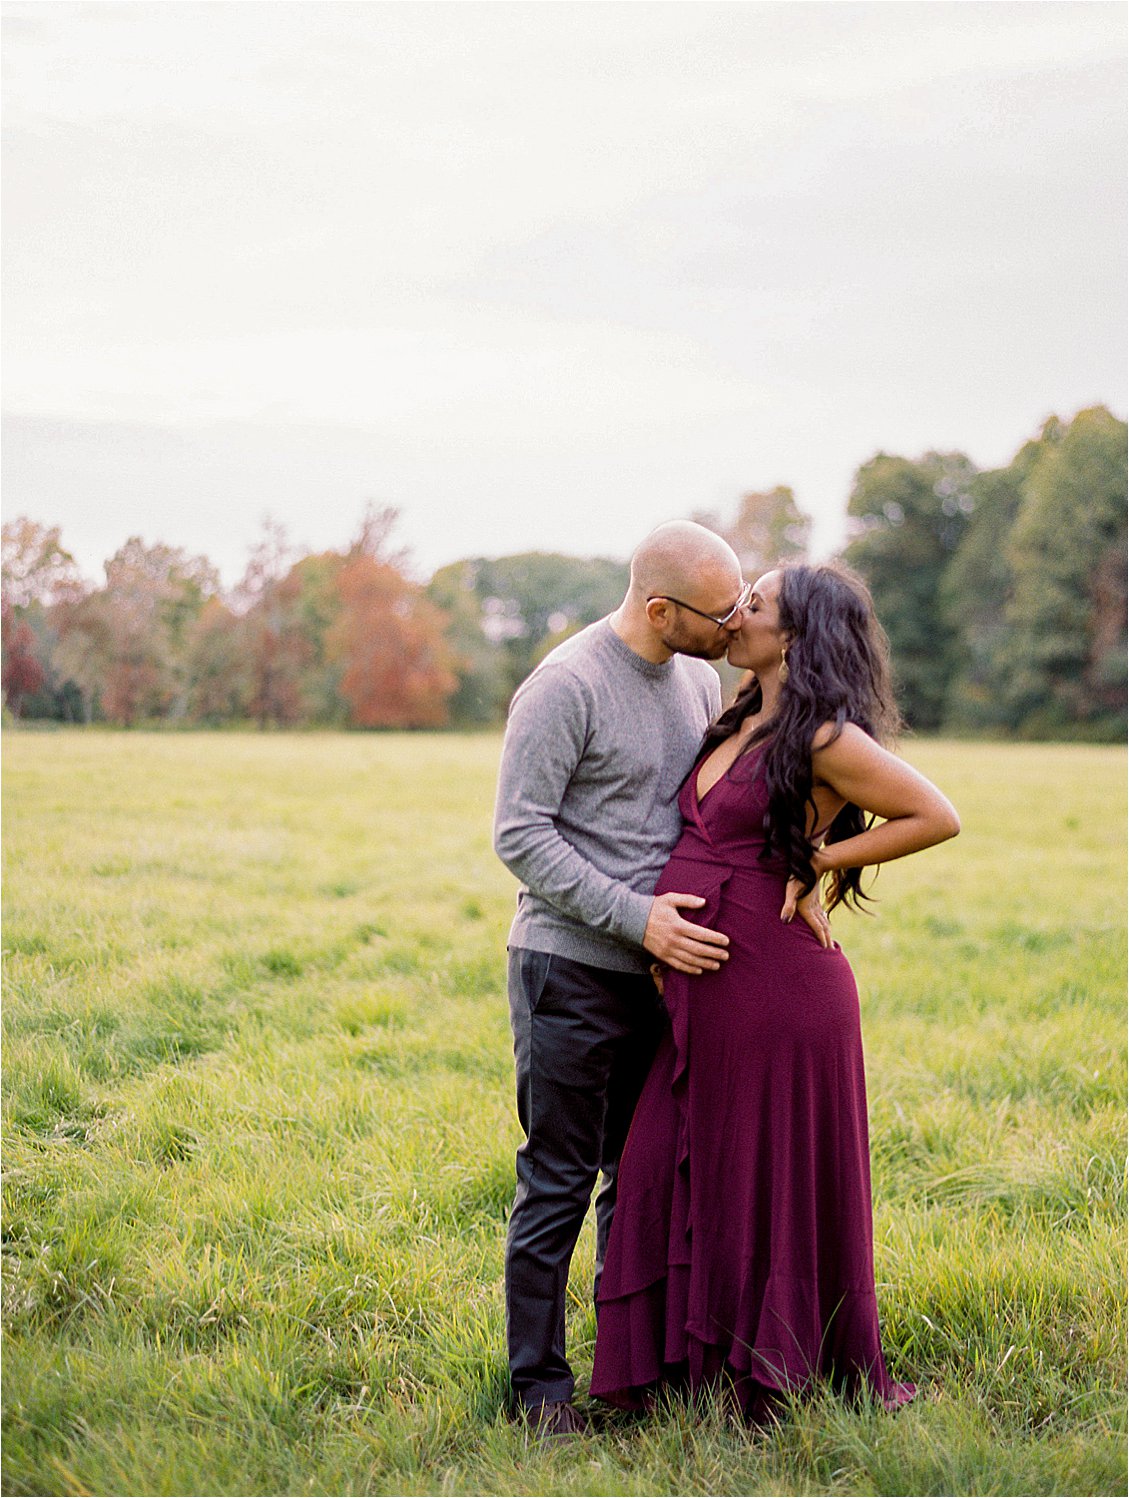 Fall Maternity session in an open field with destination film photographer Renee Hollingshead